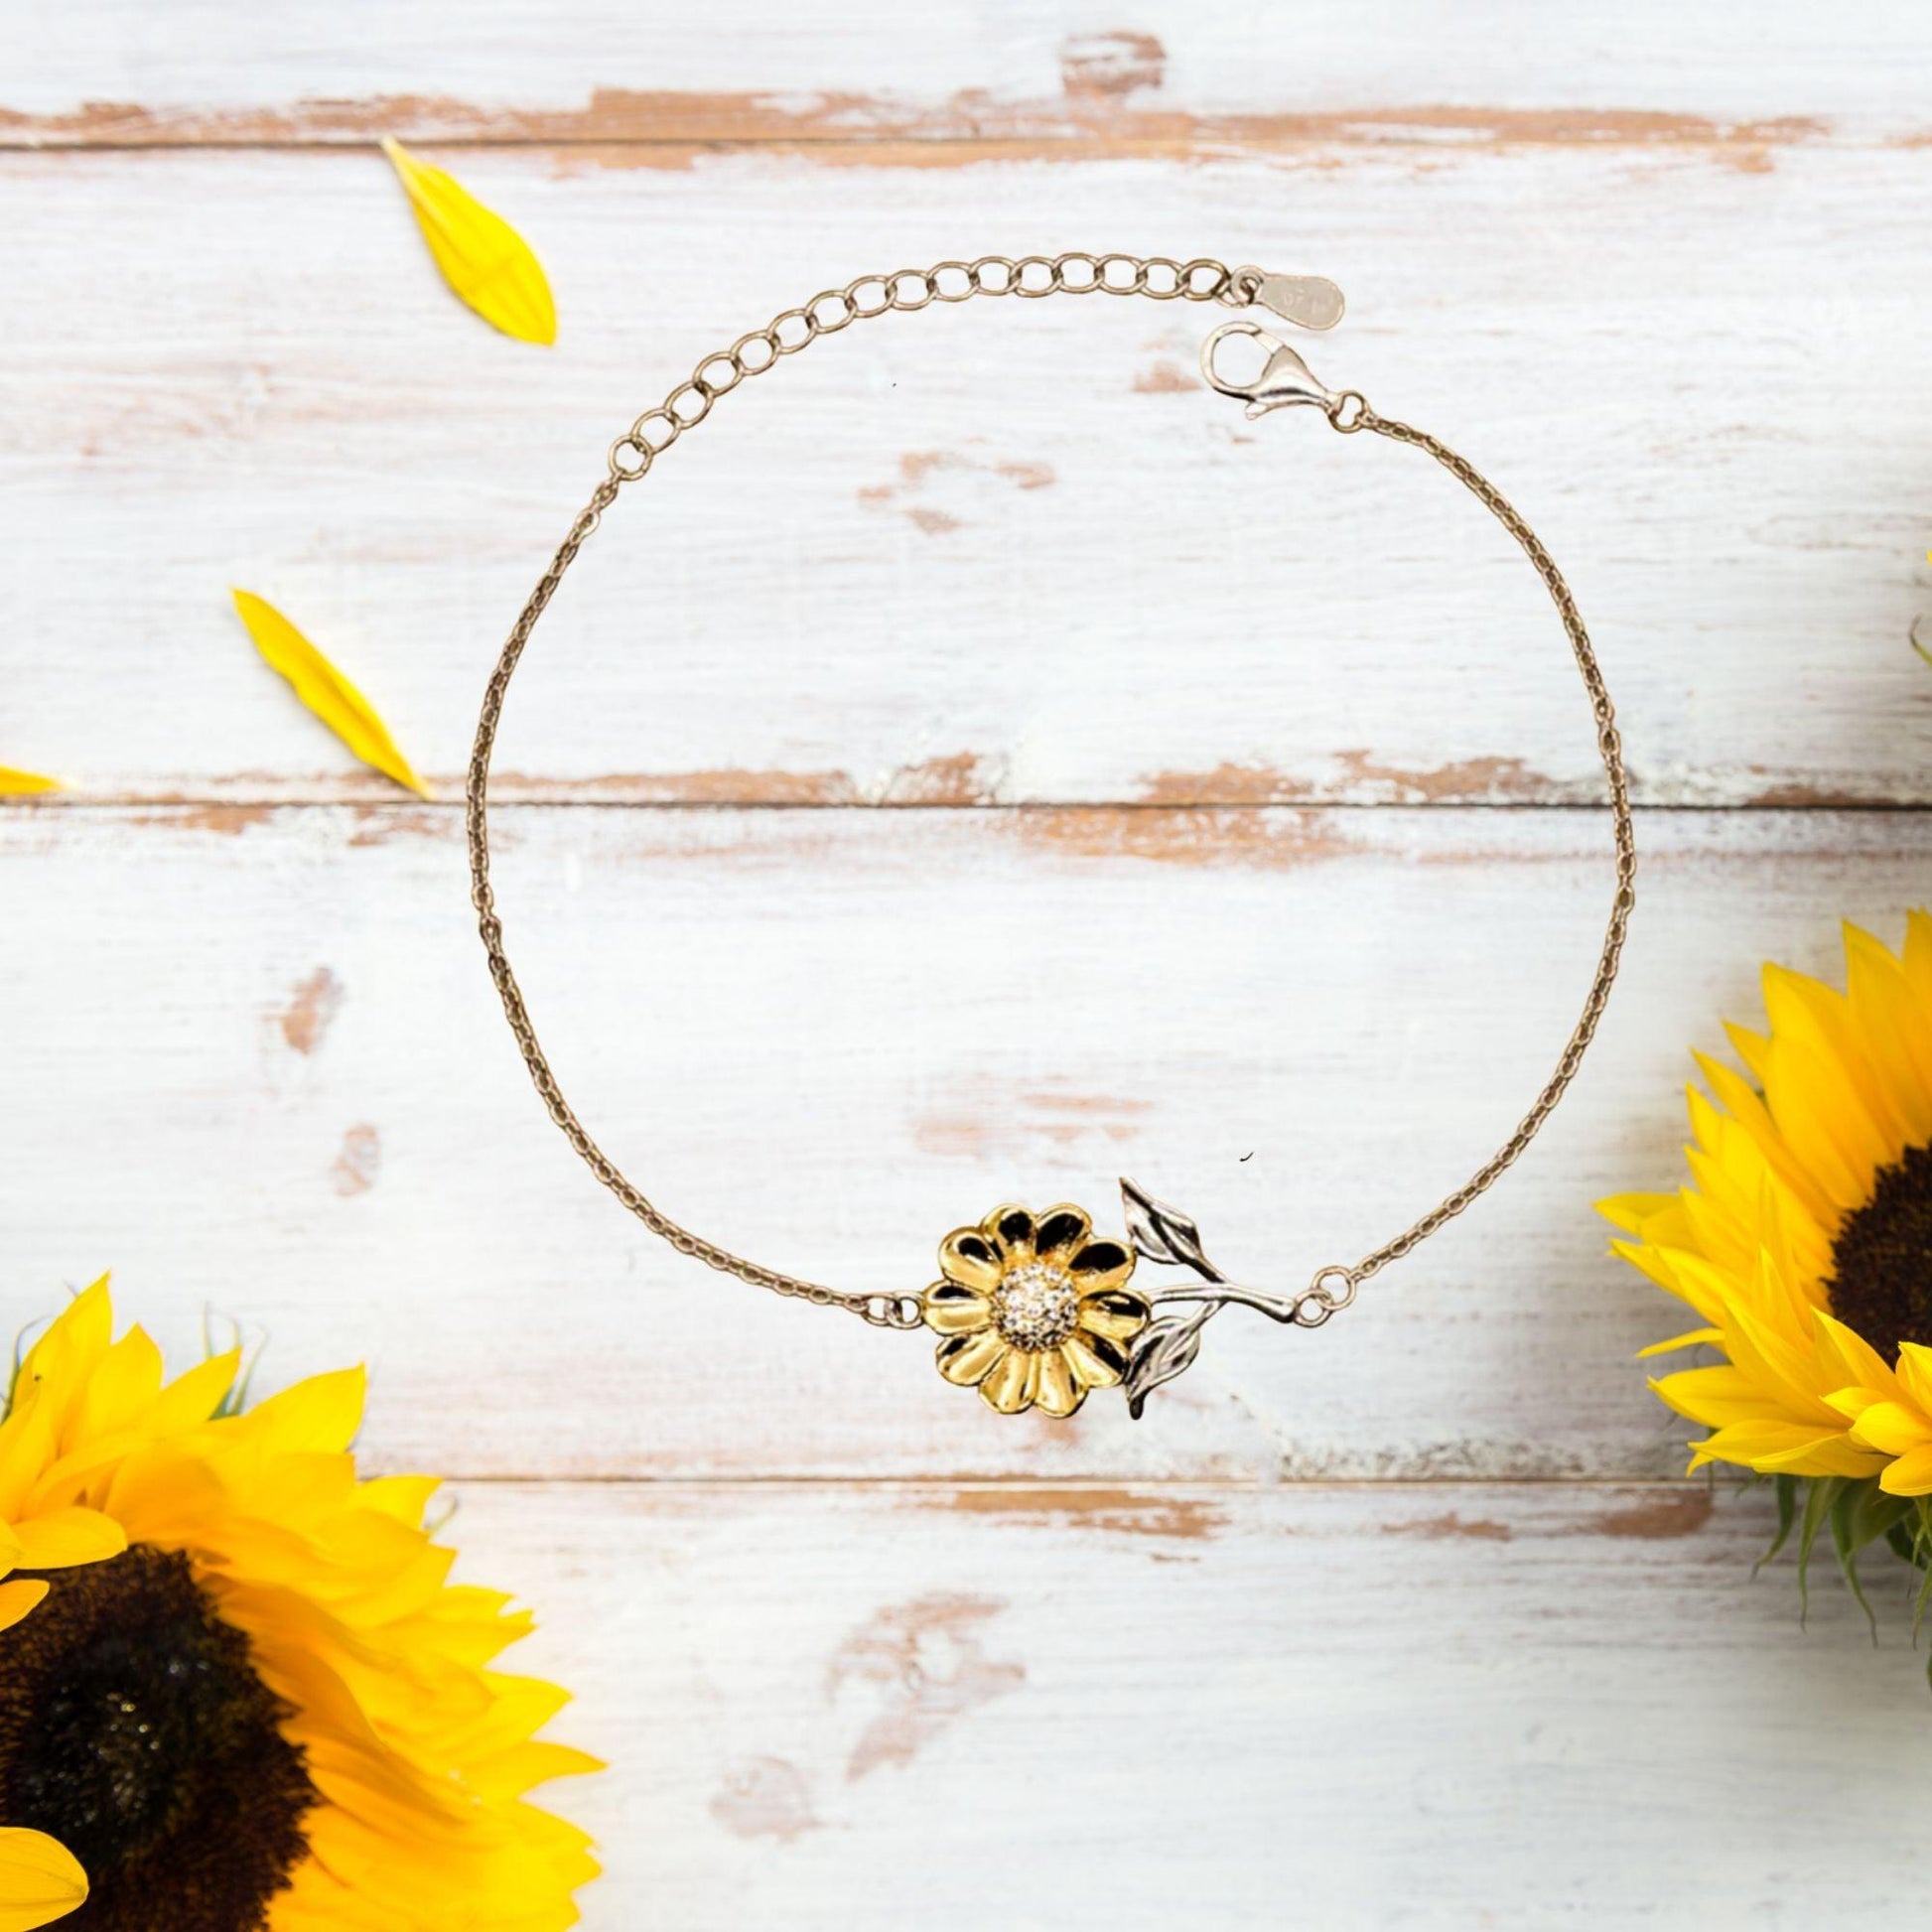 Dispatcher Sunflower Bracelet - Thanks for being who you are - Birthday Christmas Jewelry Gifts Coworkers Colleague Boss - Mallard Moon Gift Shop